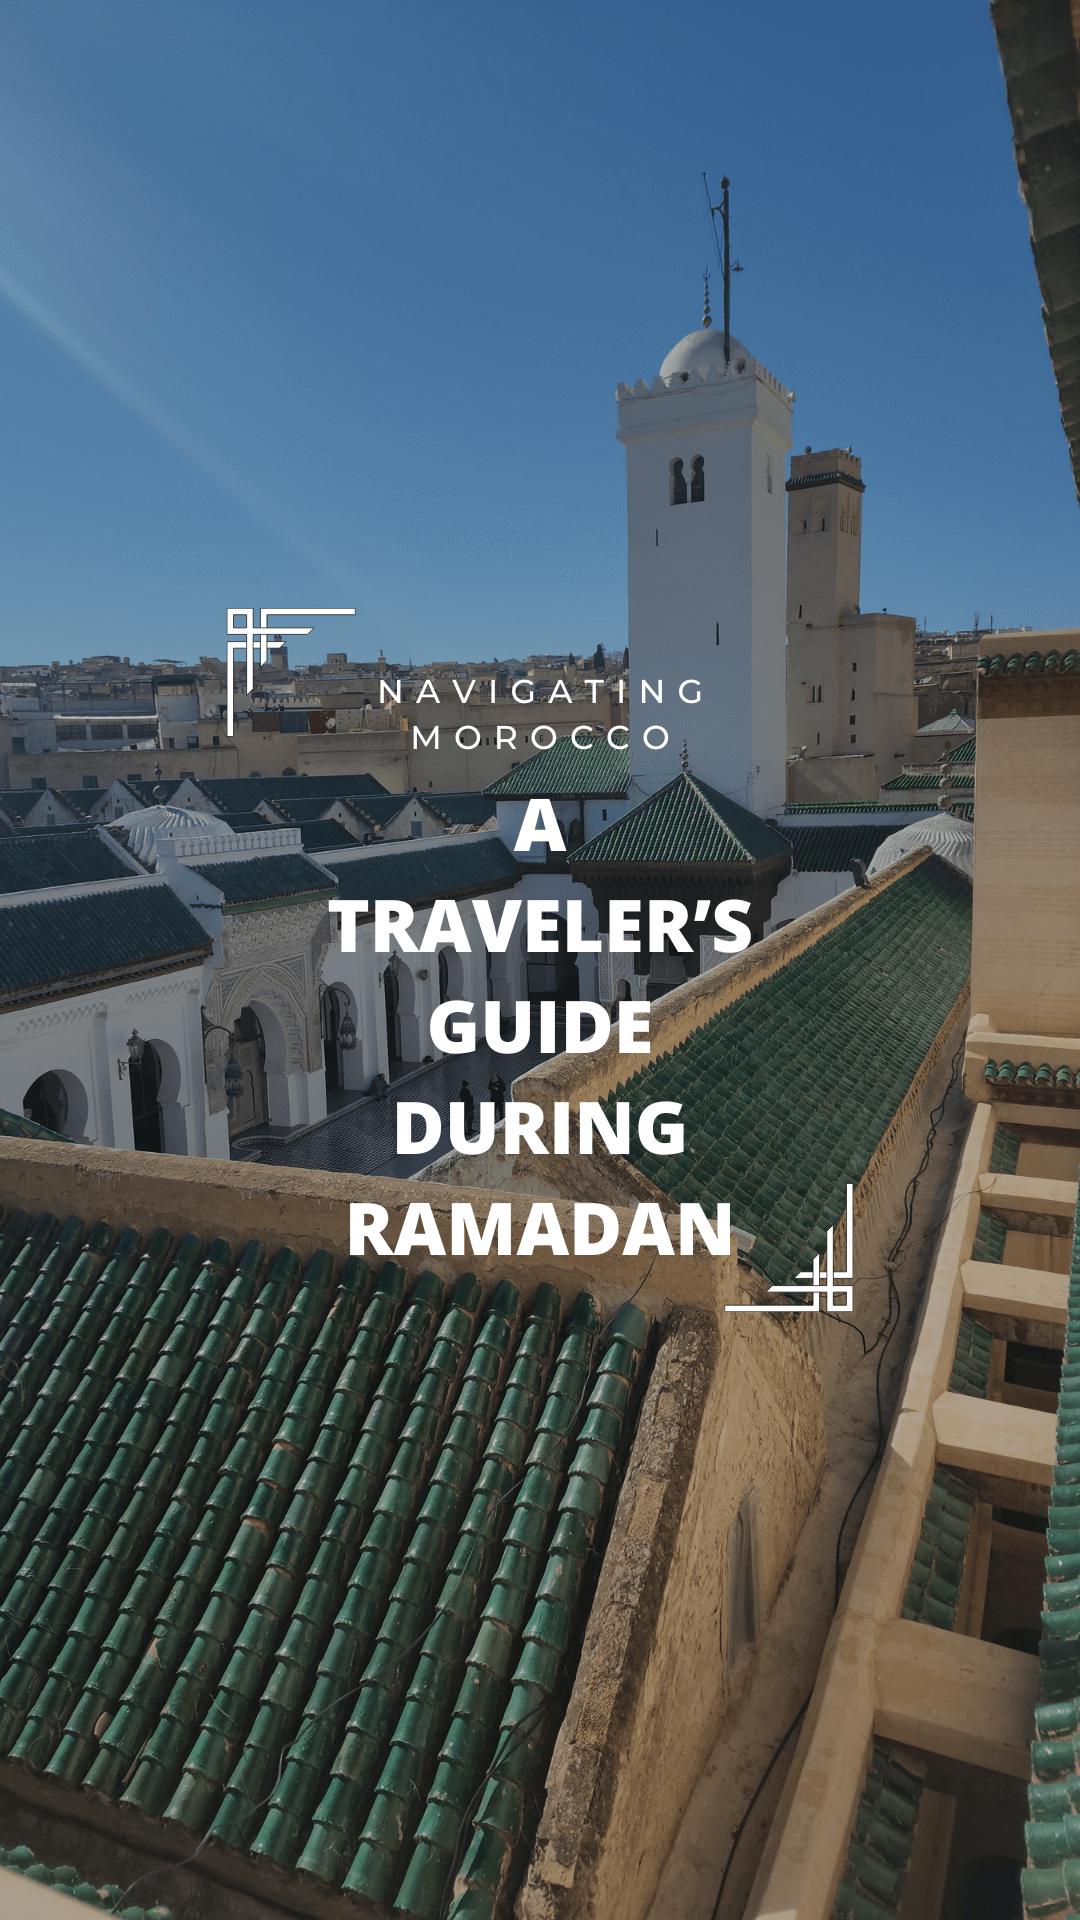 Featured image for “Navigating Morocco: A Traveler’s Guide During Ramadan”